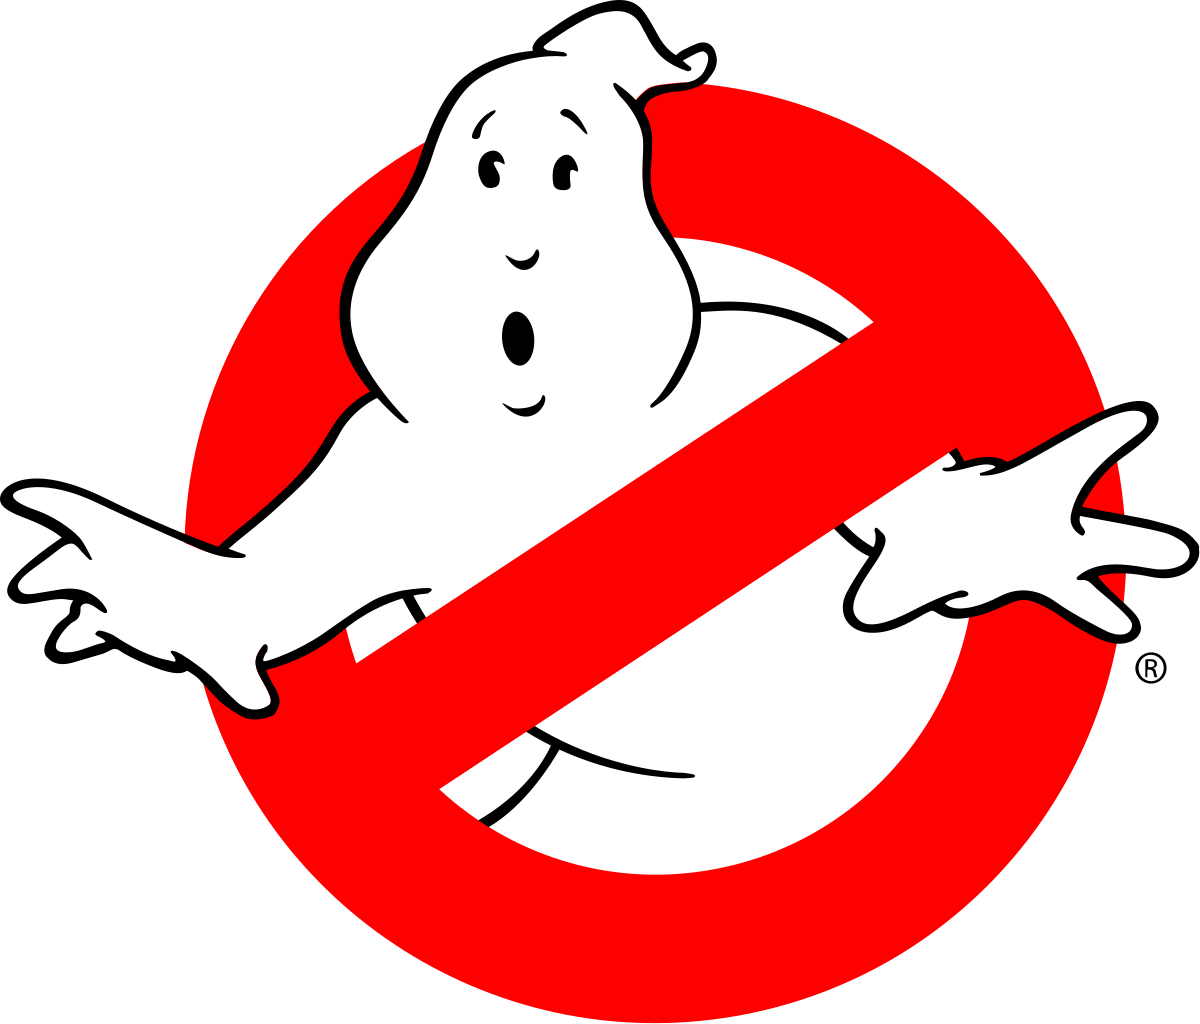 Ghost ghostbusters